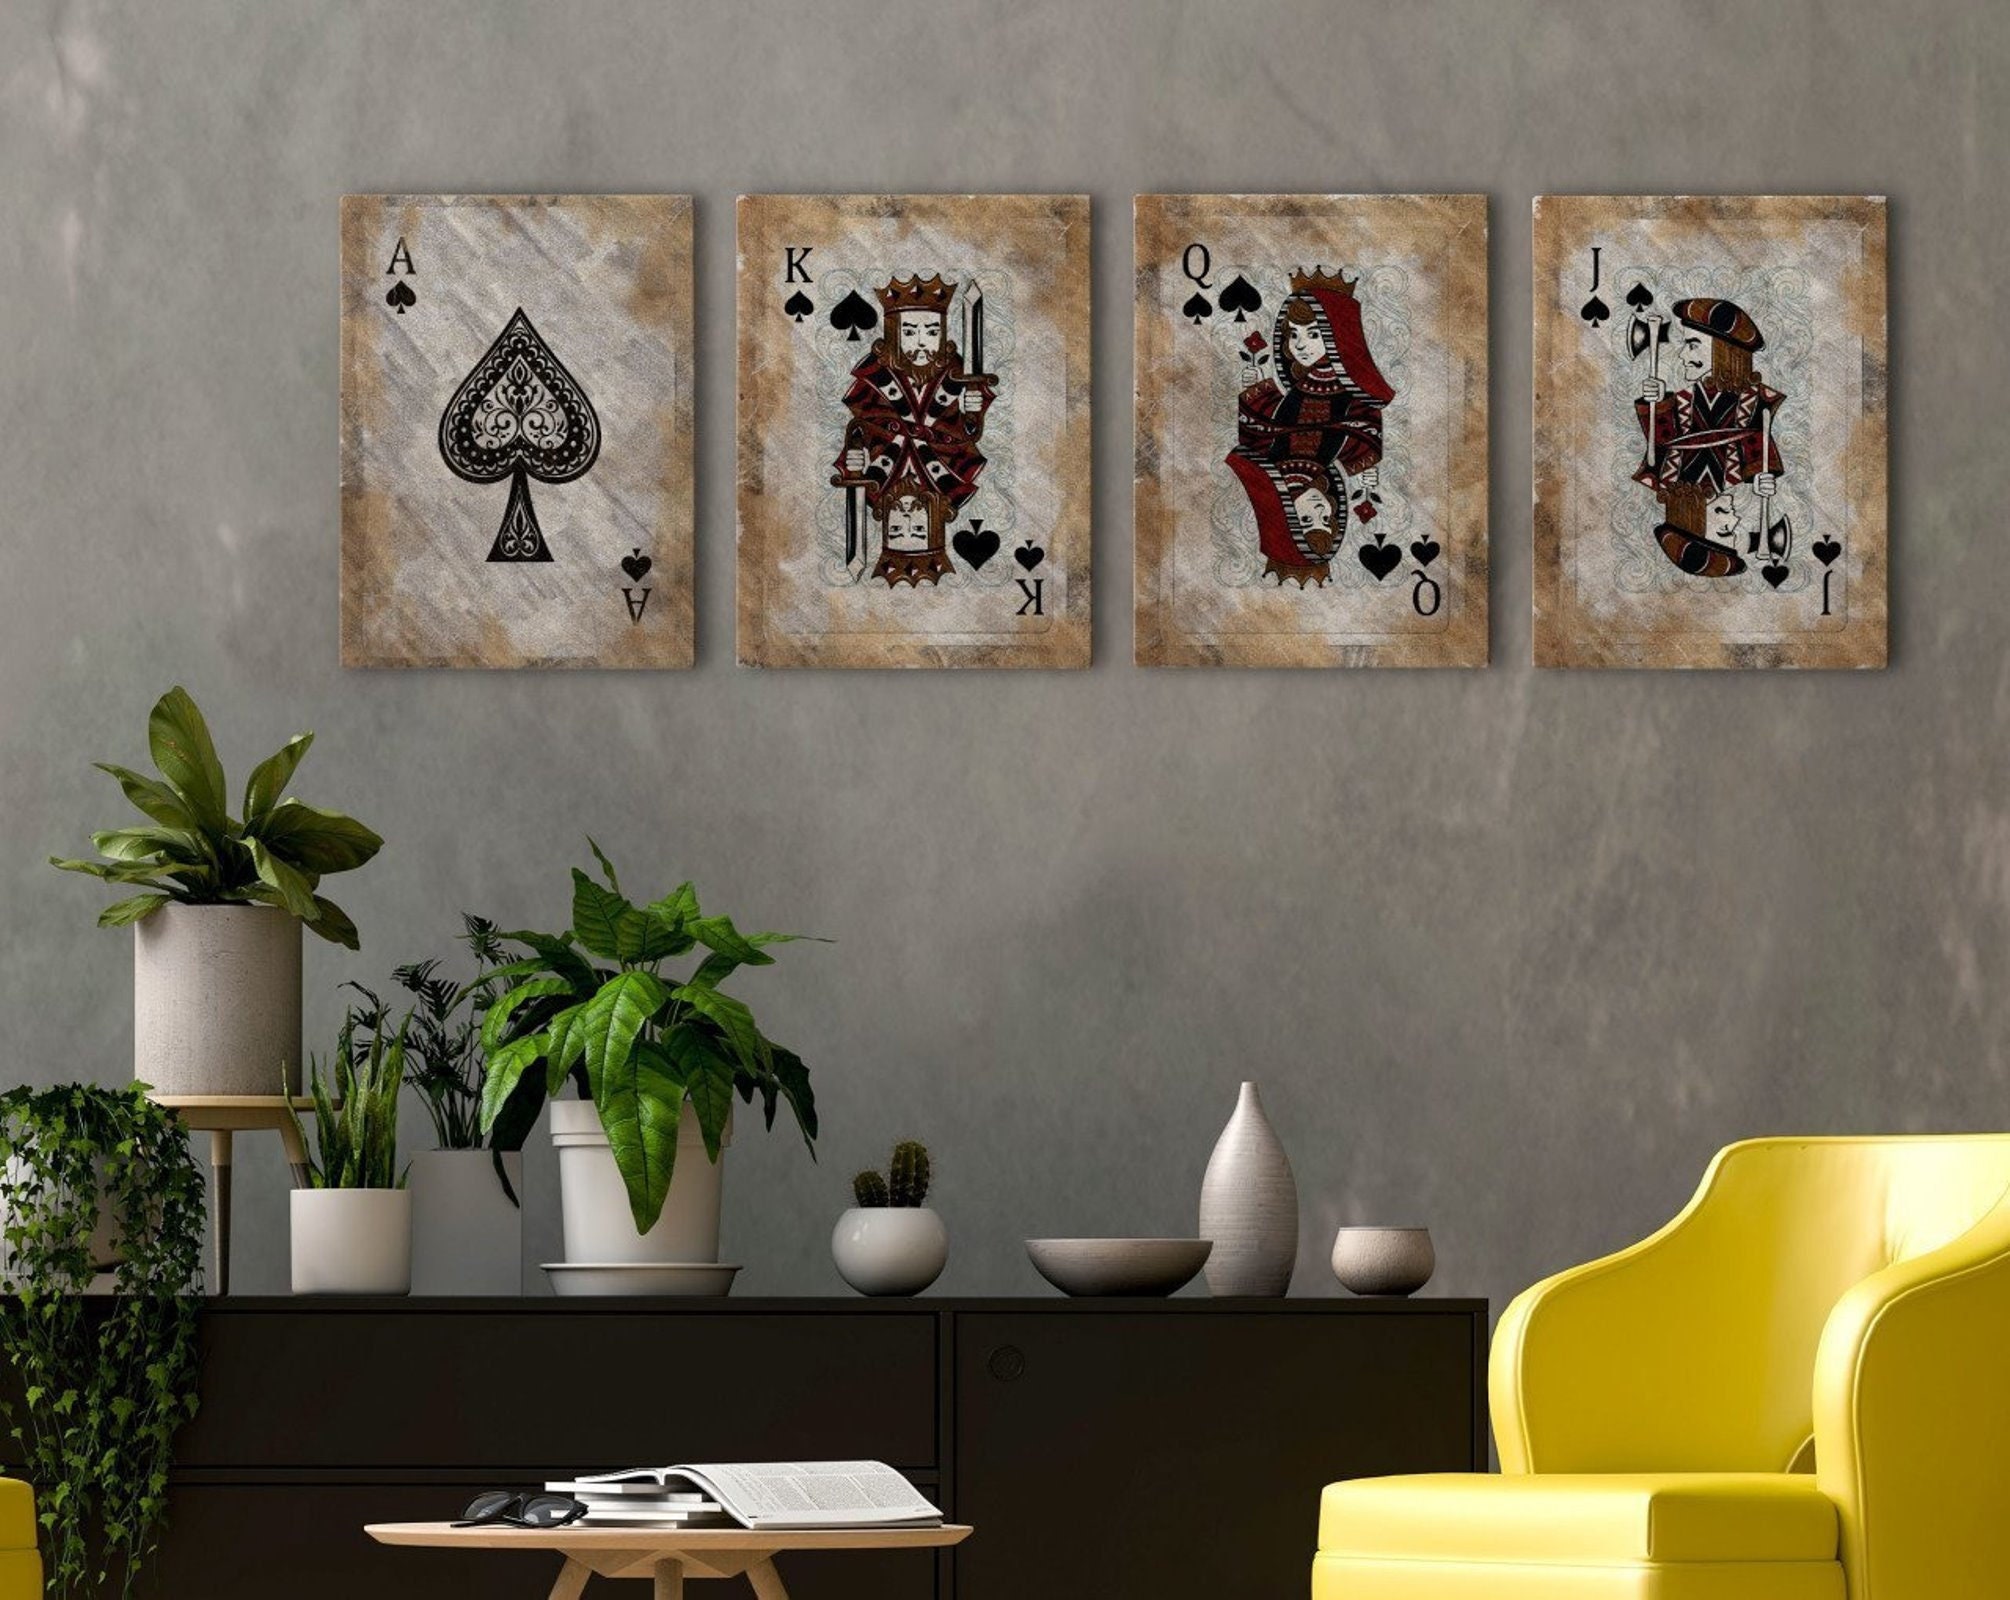  4 Playing Card King Queen Jack Joker Suited Royal Family Poker  Art Prints 12x12: Posters & Prints